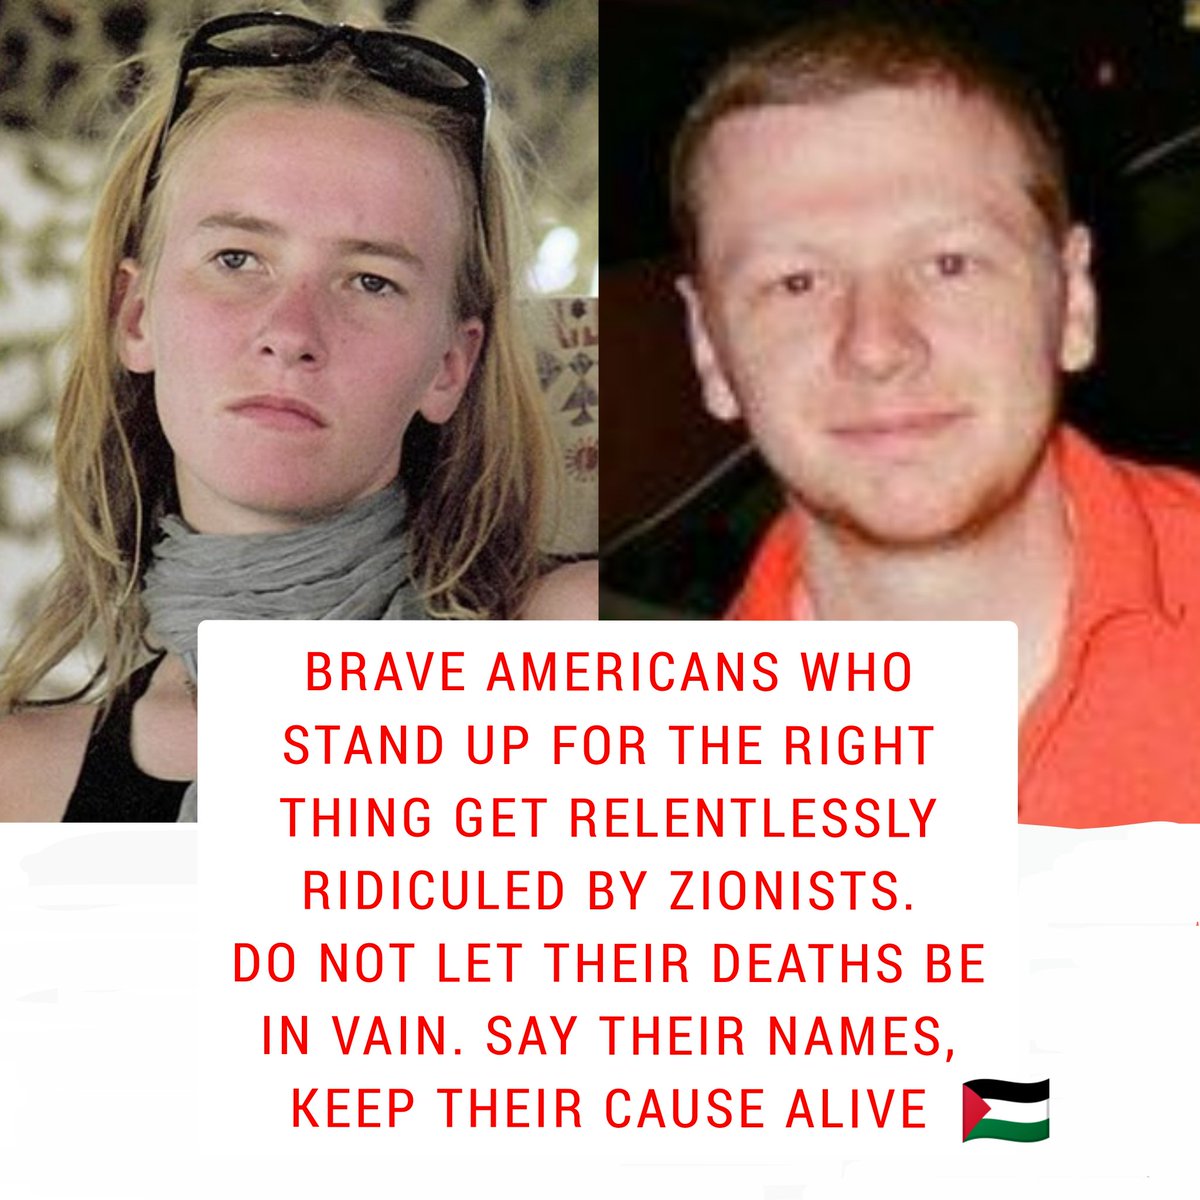 Rachel Corrie. Aaron Bushnell. We will never forget you. You did not give your lives in vain. You were heroes with a pure heart. #FreePalestine #AaronBushnell #RachelCorrie